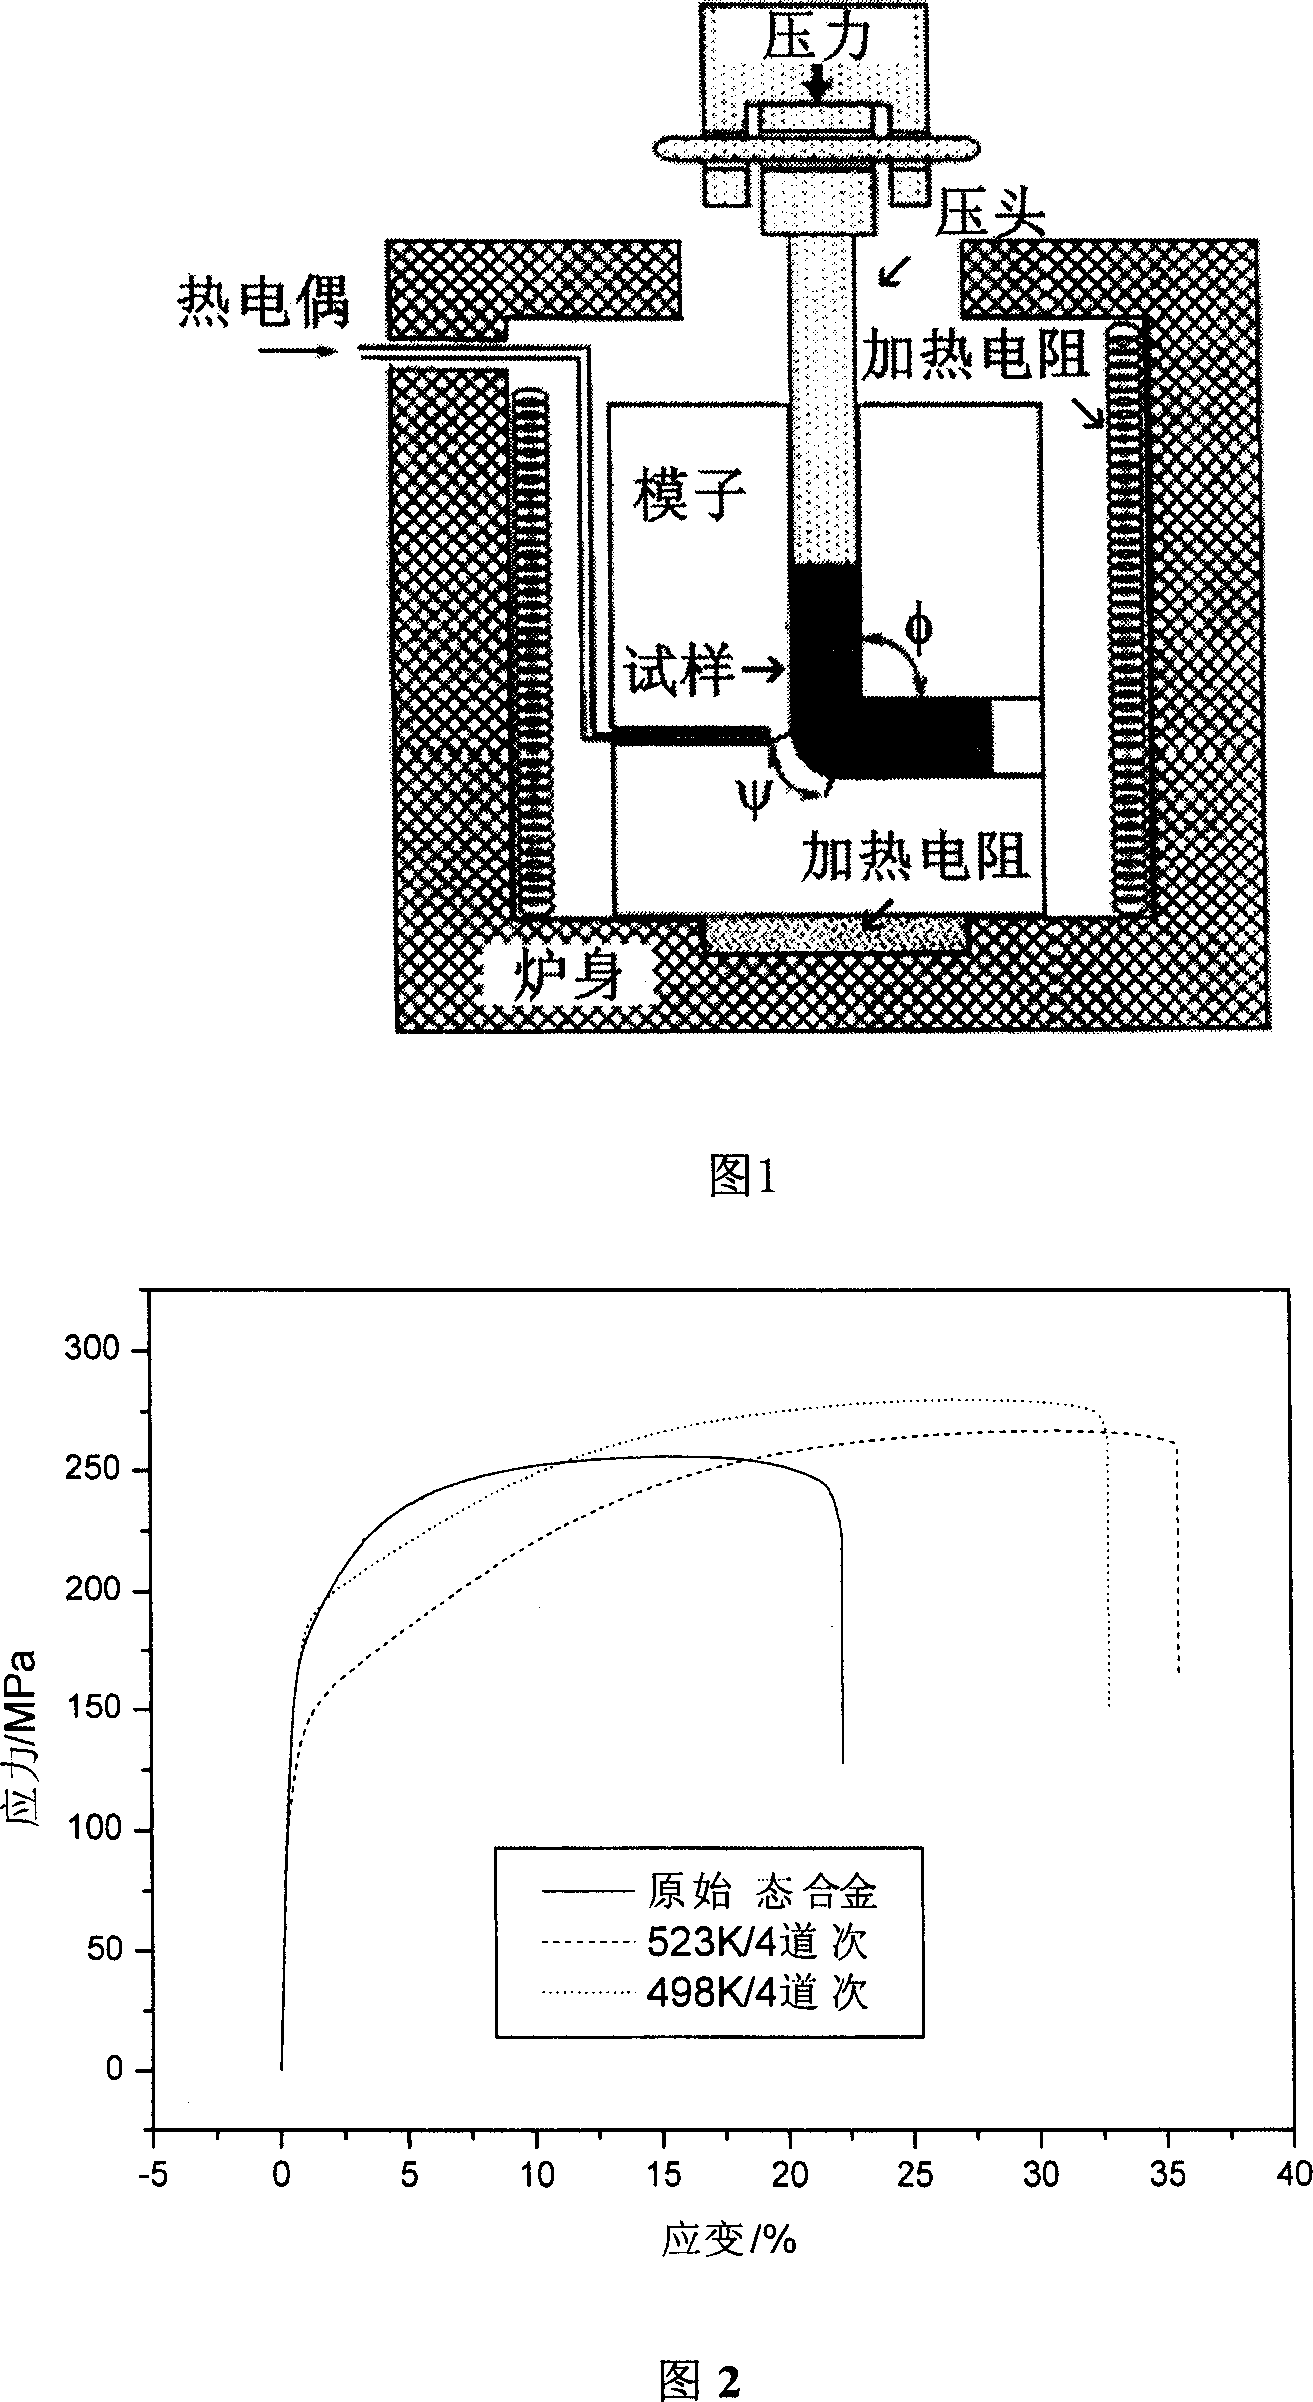 Method for extrusion two-step equal channel angle of magnesium alloy